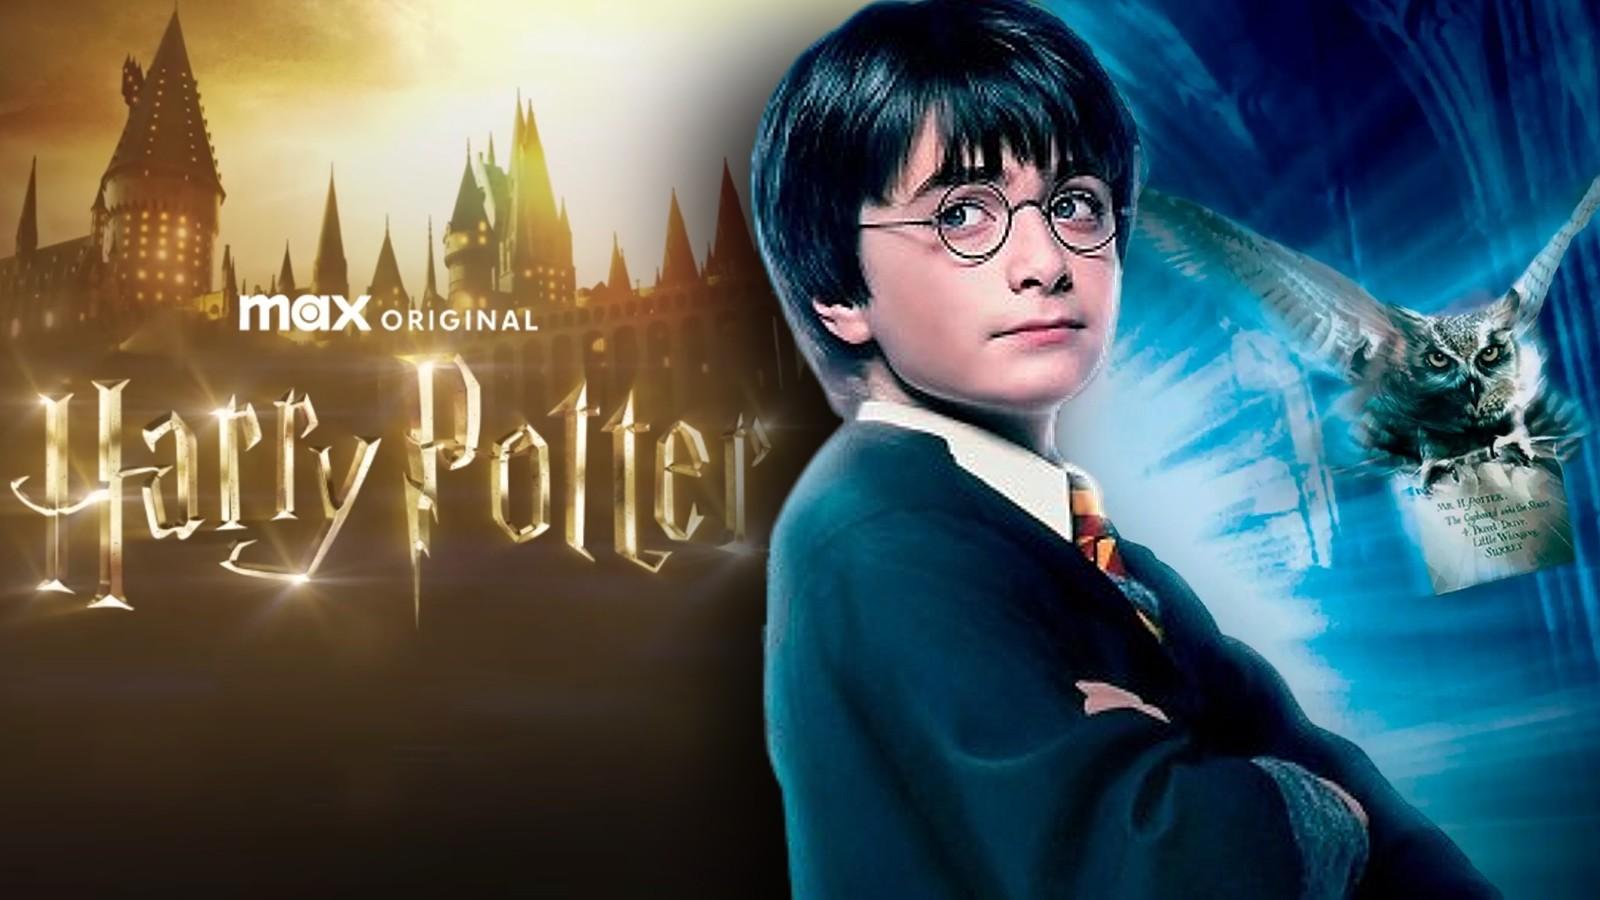 Daniel Radcliffe as Harry Potter and the logo for the HBO Max TV show